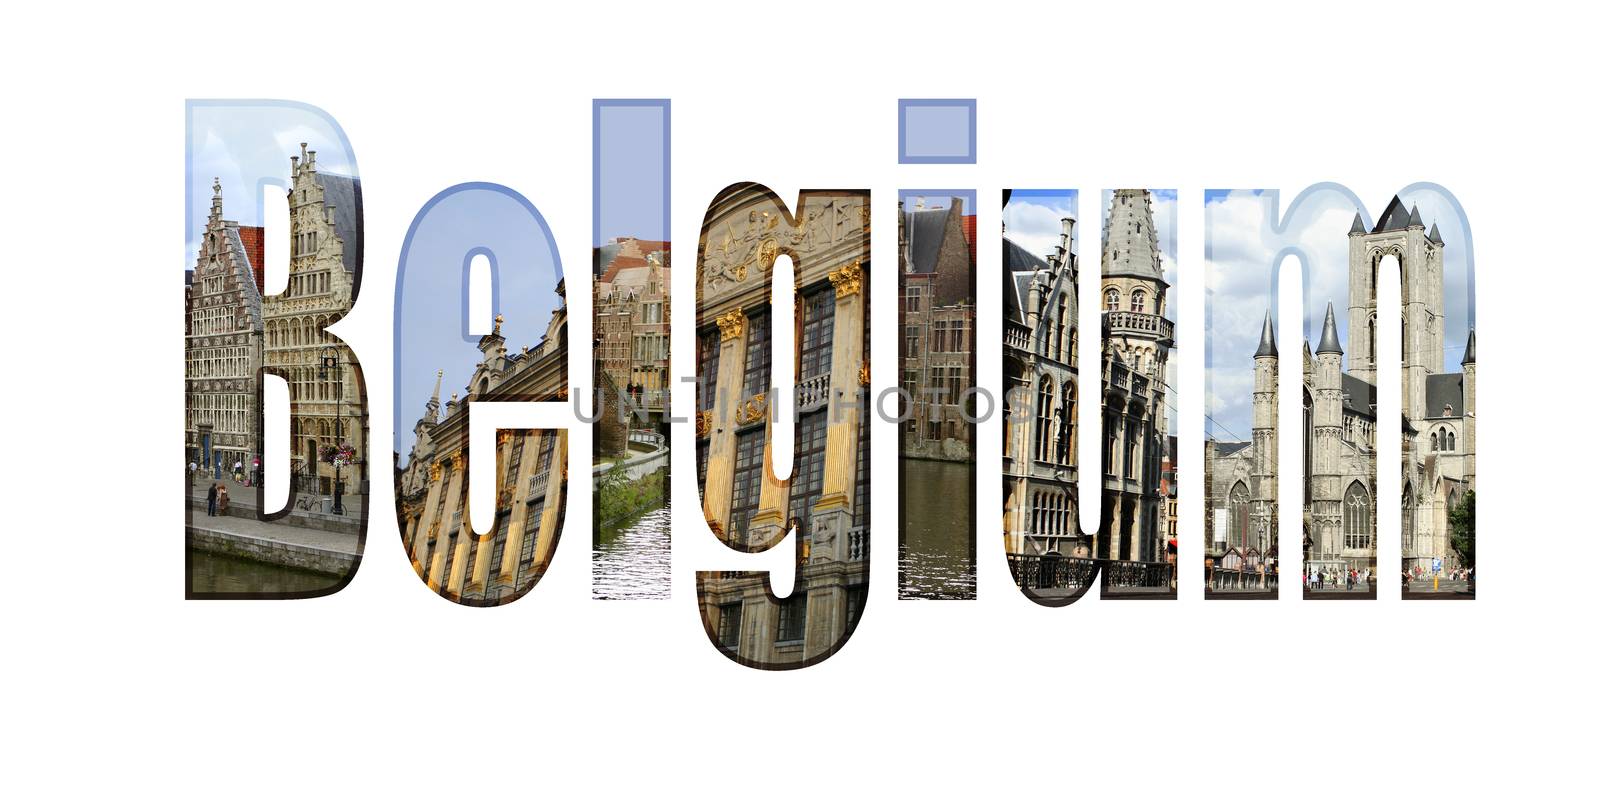 Belgium type with different tourist sites around the country such as Brussels and Ghent